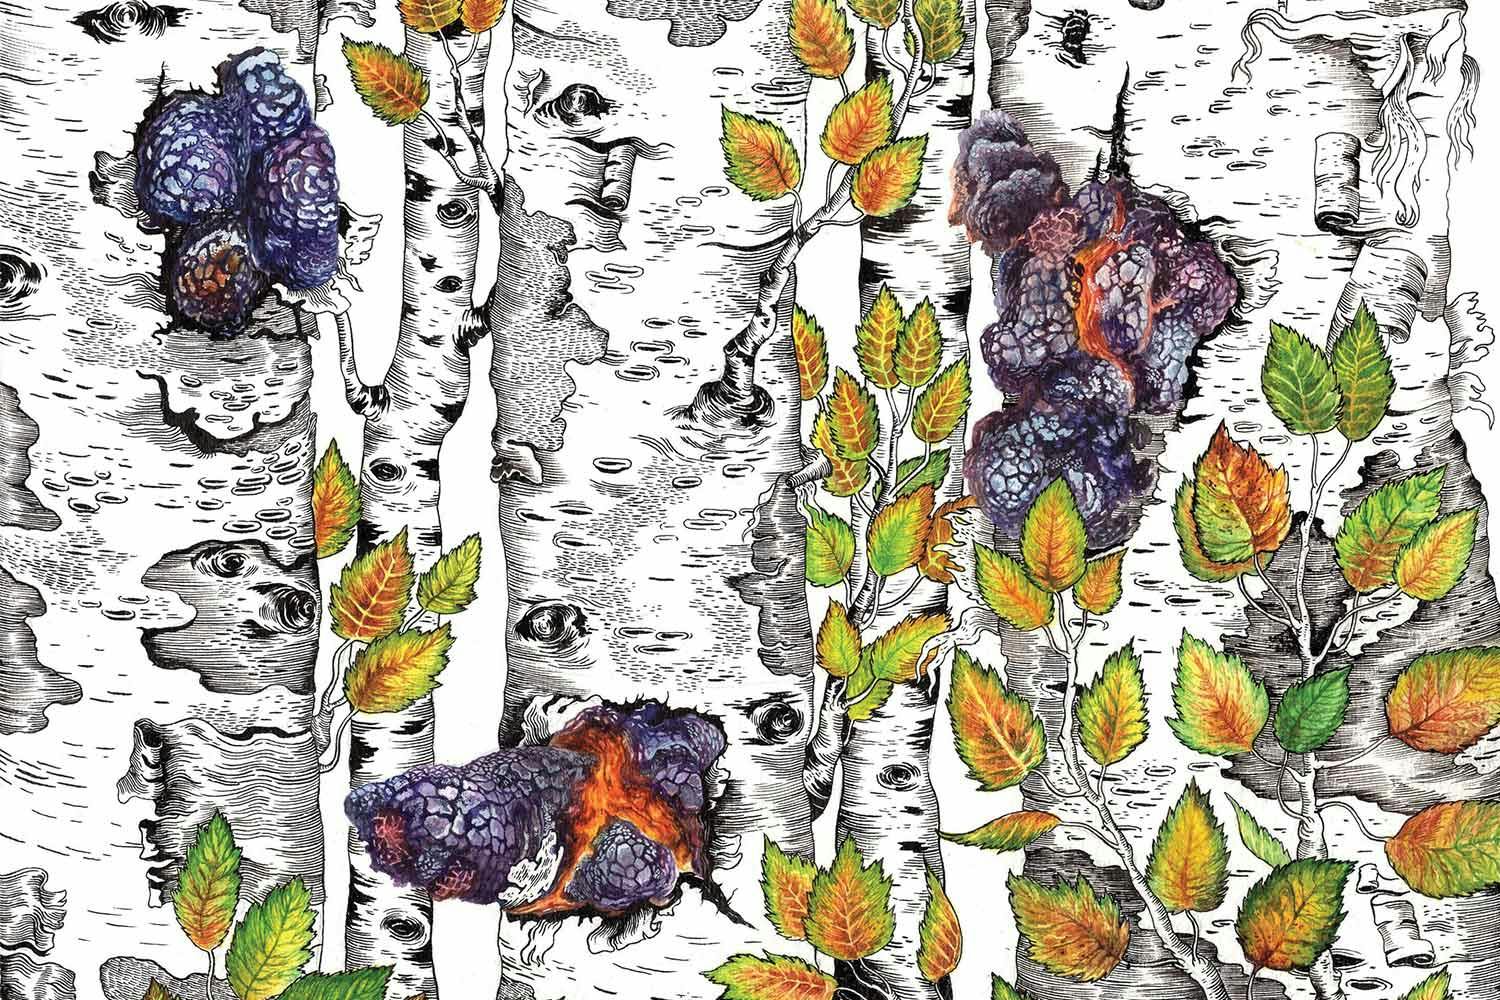 Illustration—crusty purple-black lumps of chaga mushrooms and yellow-green leaves grow from the trunks of white-barked trees.